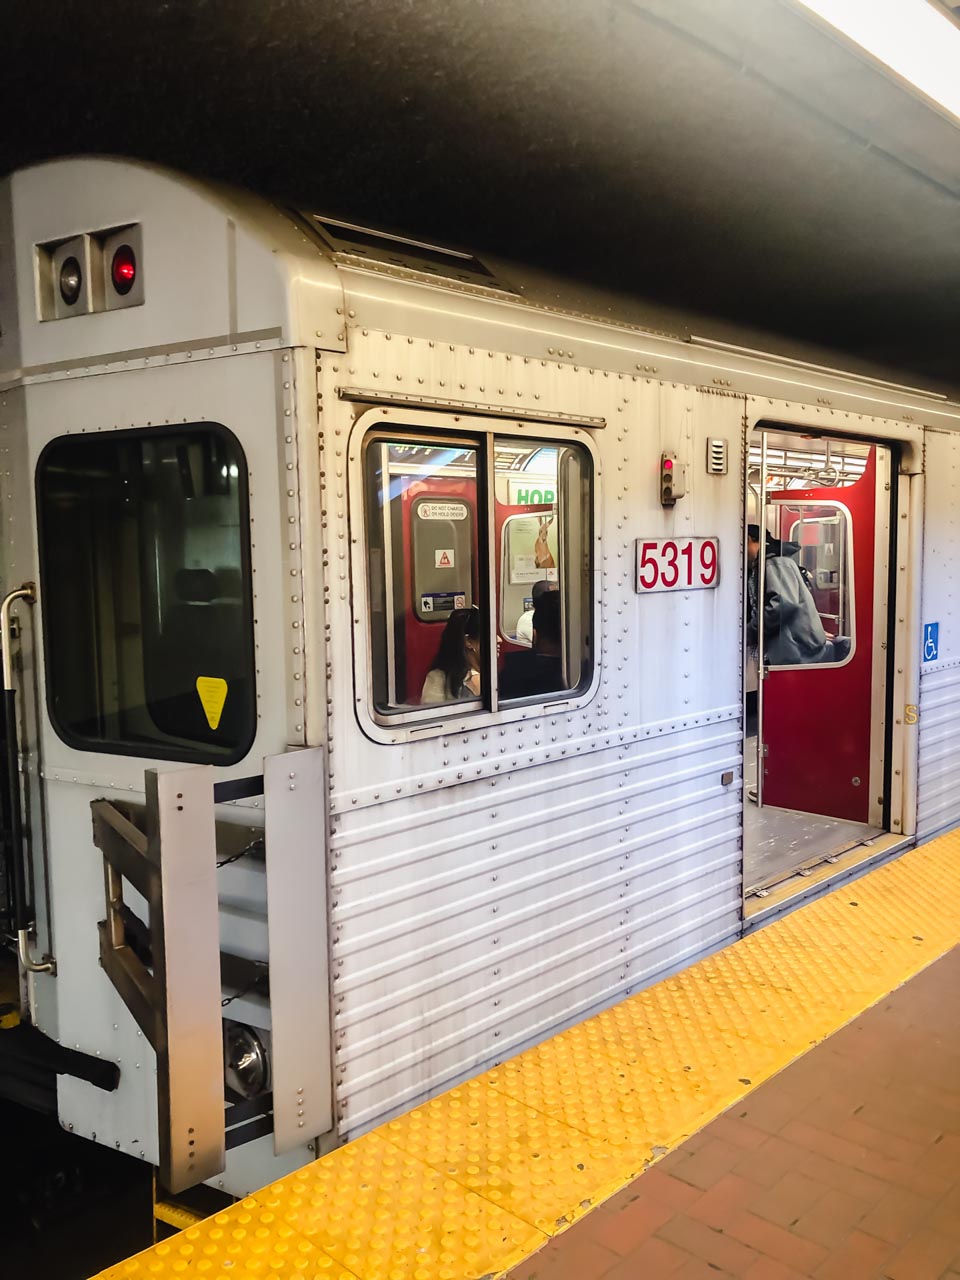 A subway train standing on a platform in Toronto, Canada